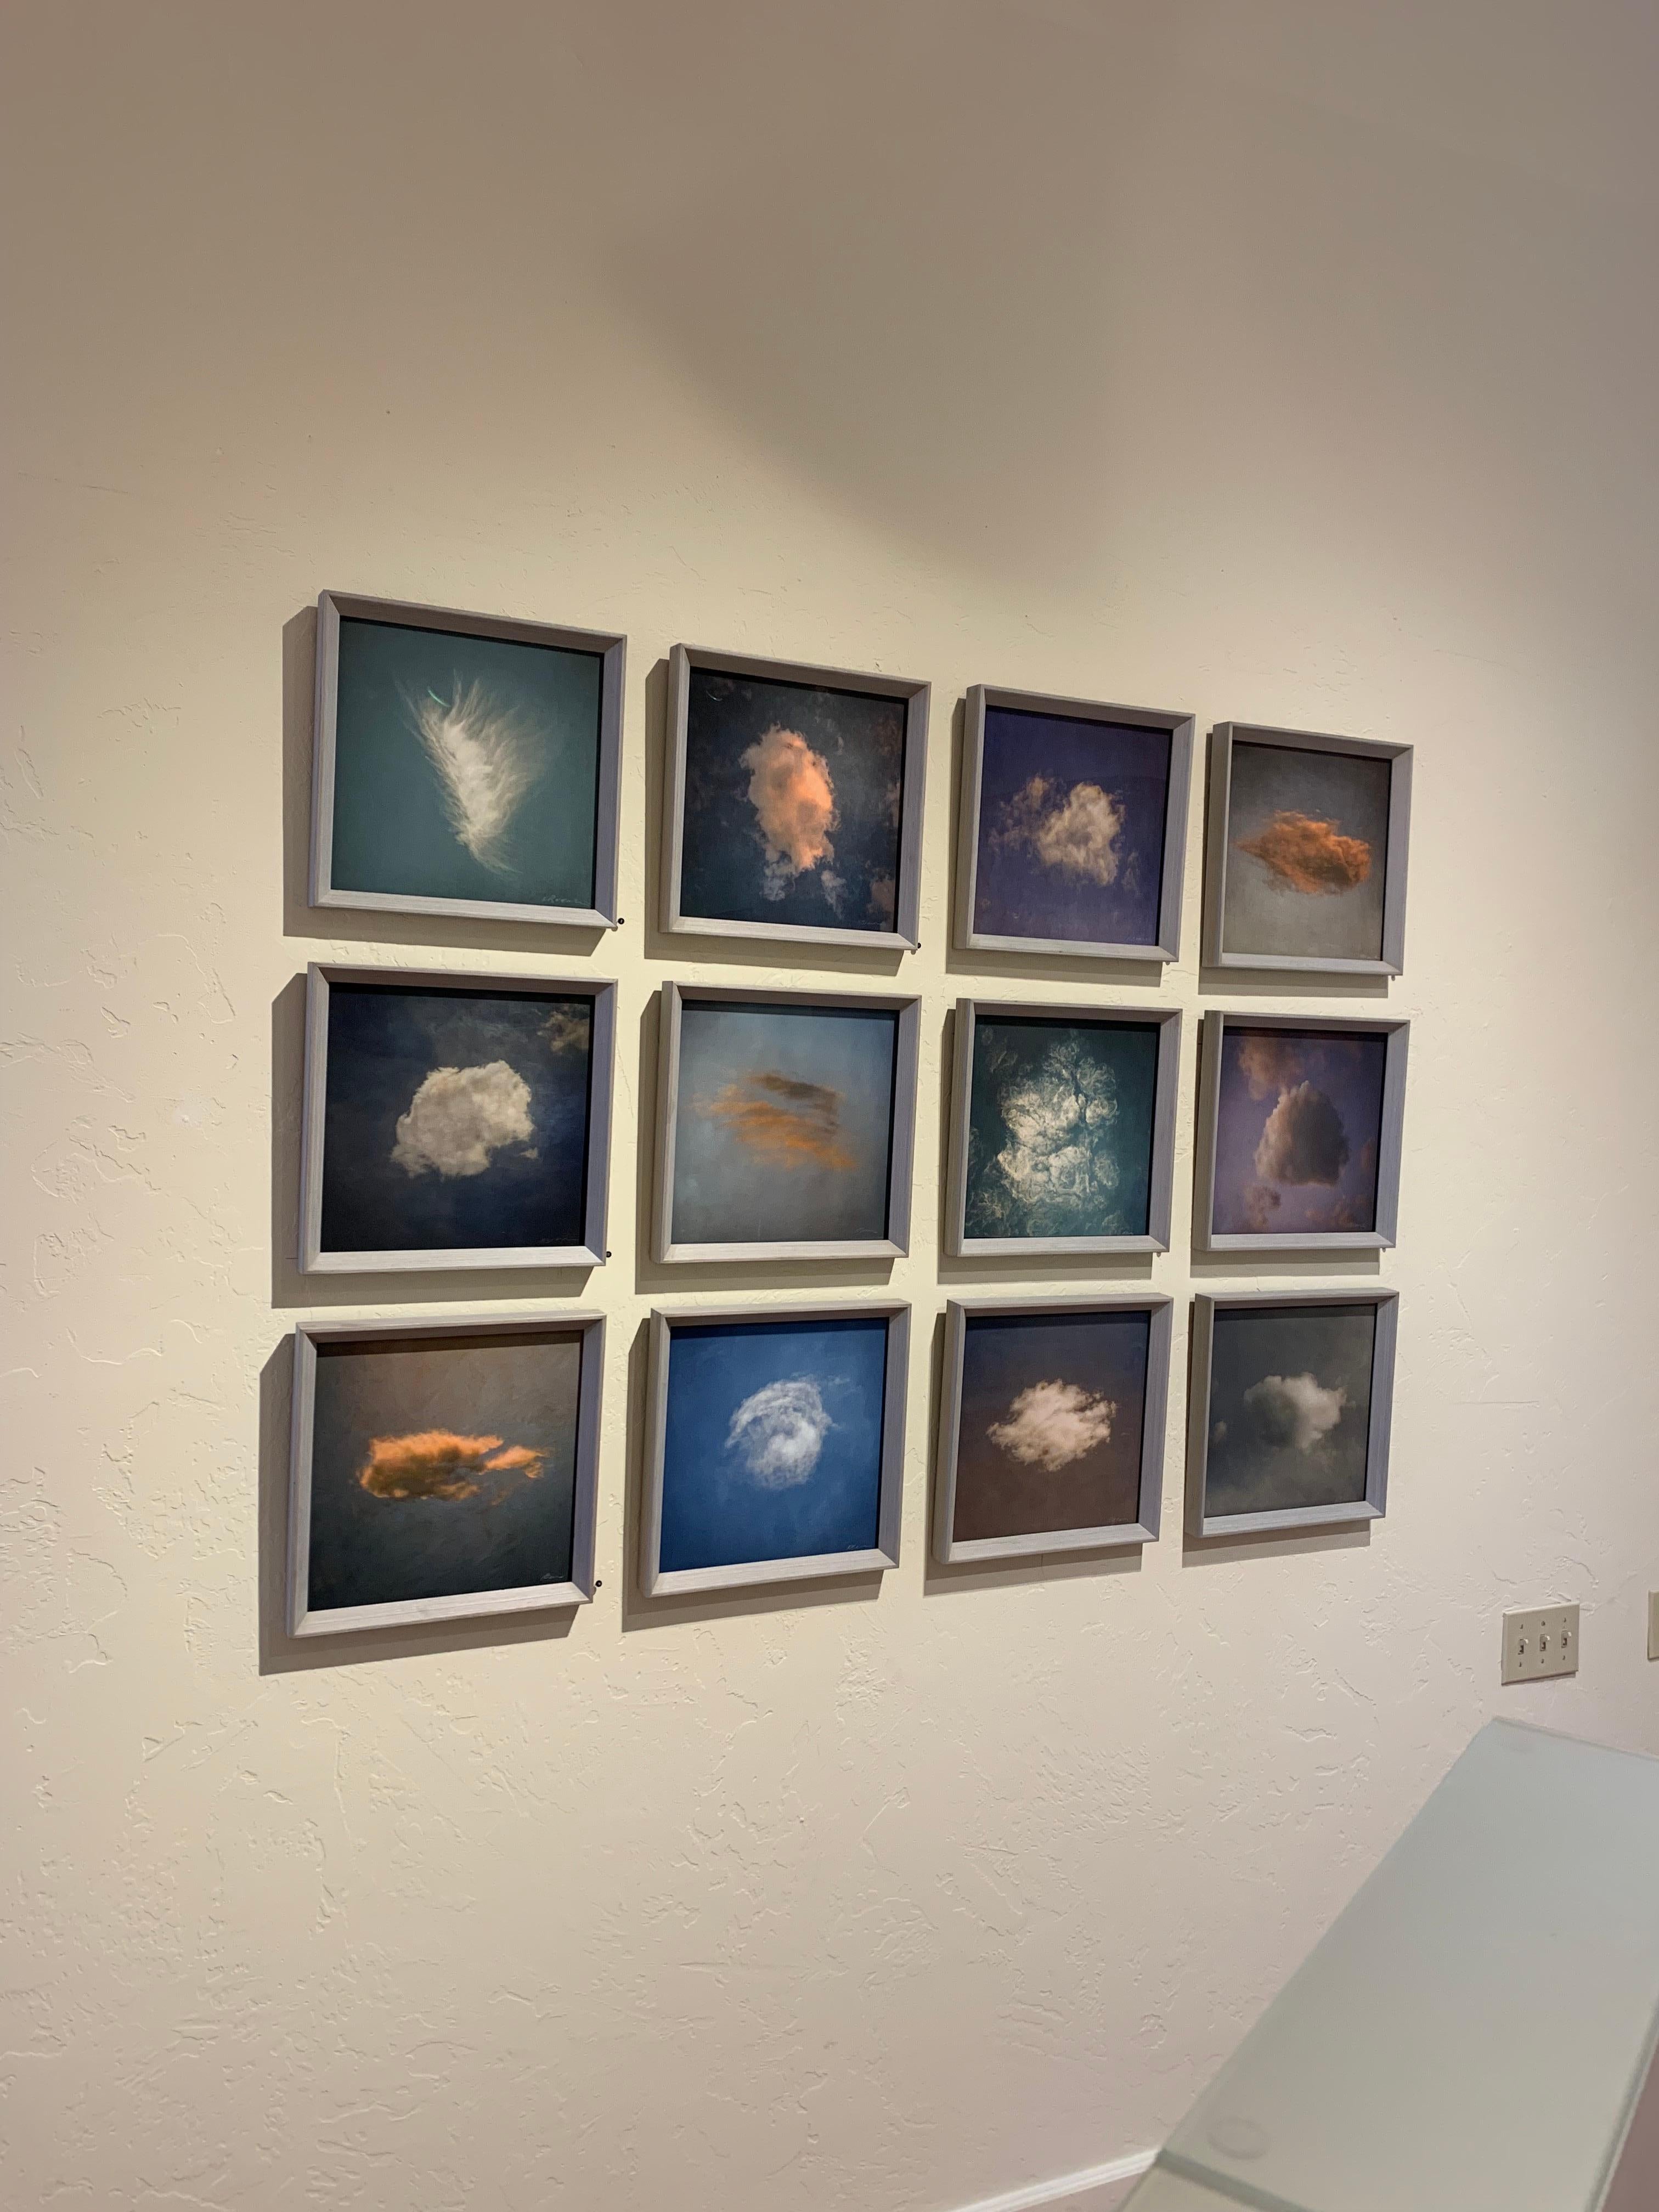 Twelve Clouds, Softly, Slowly (F) - Photograph by Kate Breakey